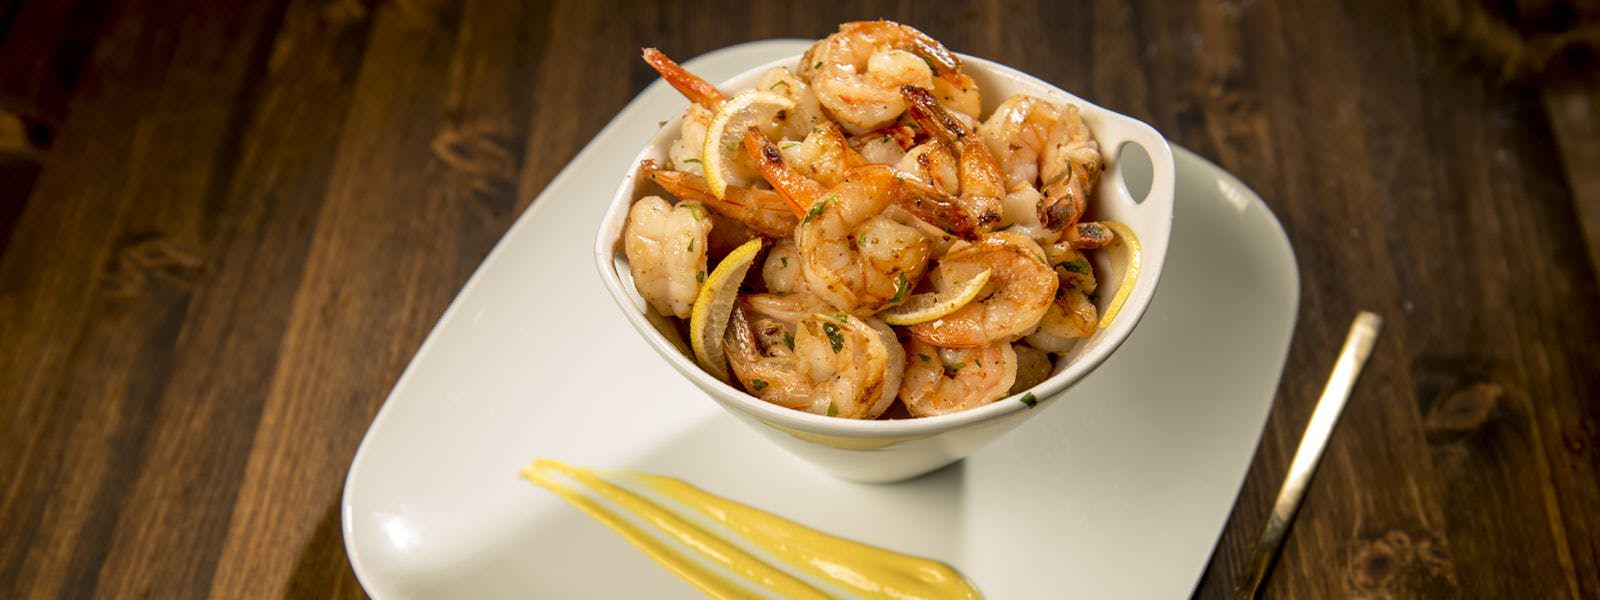 Grilled Shrimp with Mustard Sauce